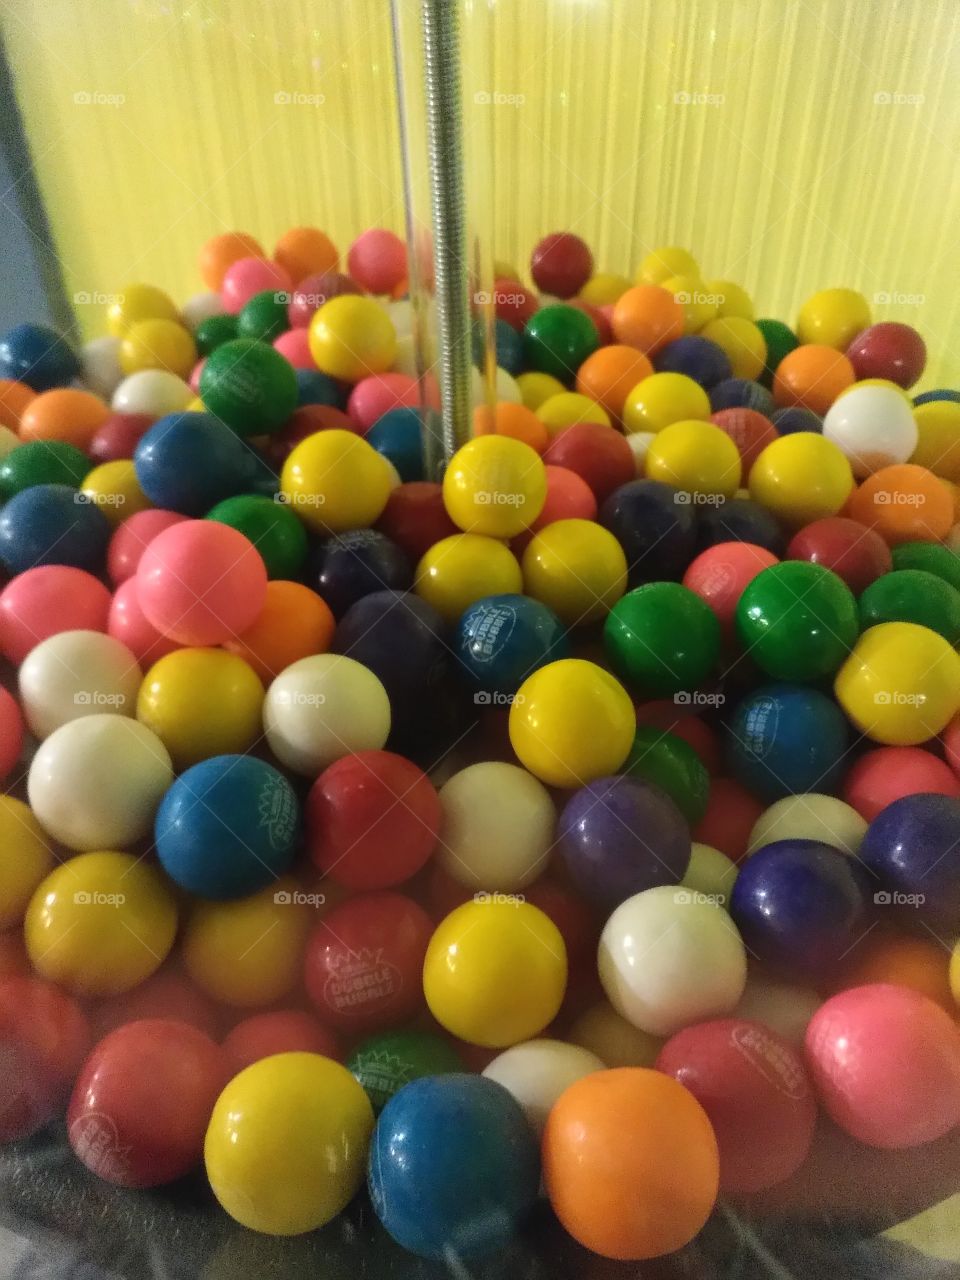 gumballs what inner child doesn't remember gumballs
gumballs brings the inner child out
fun times gum times